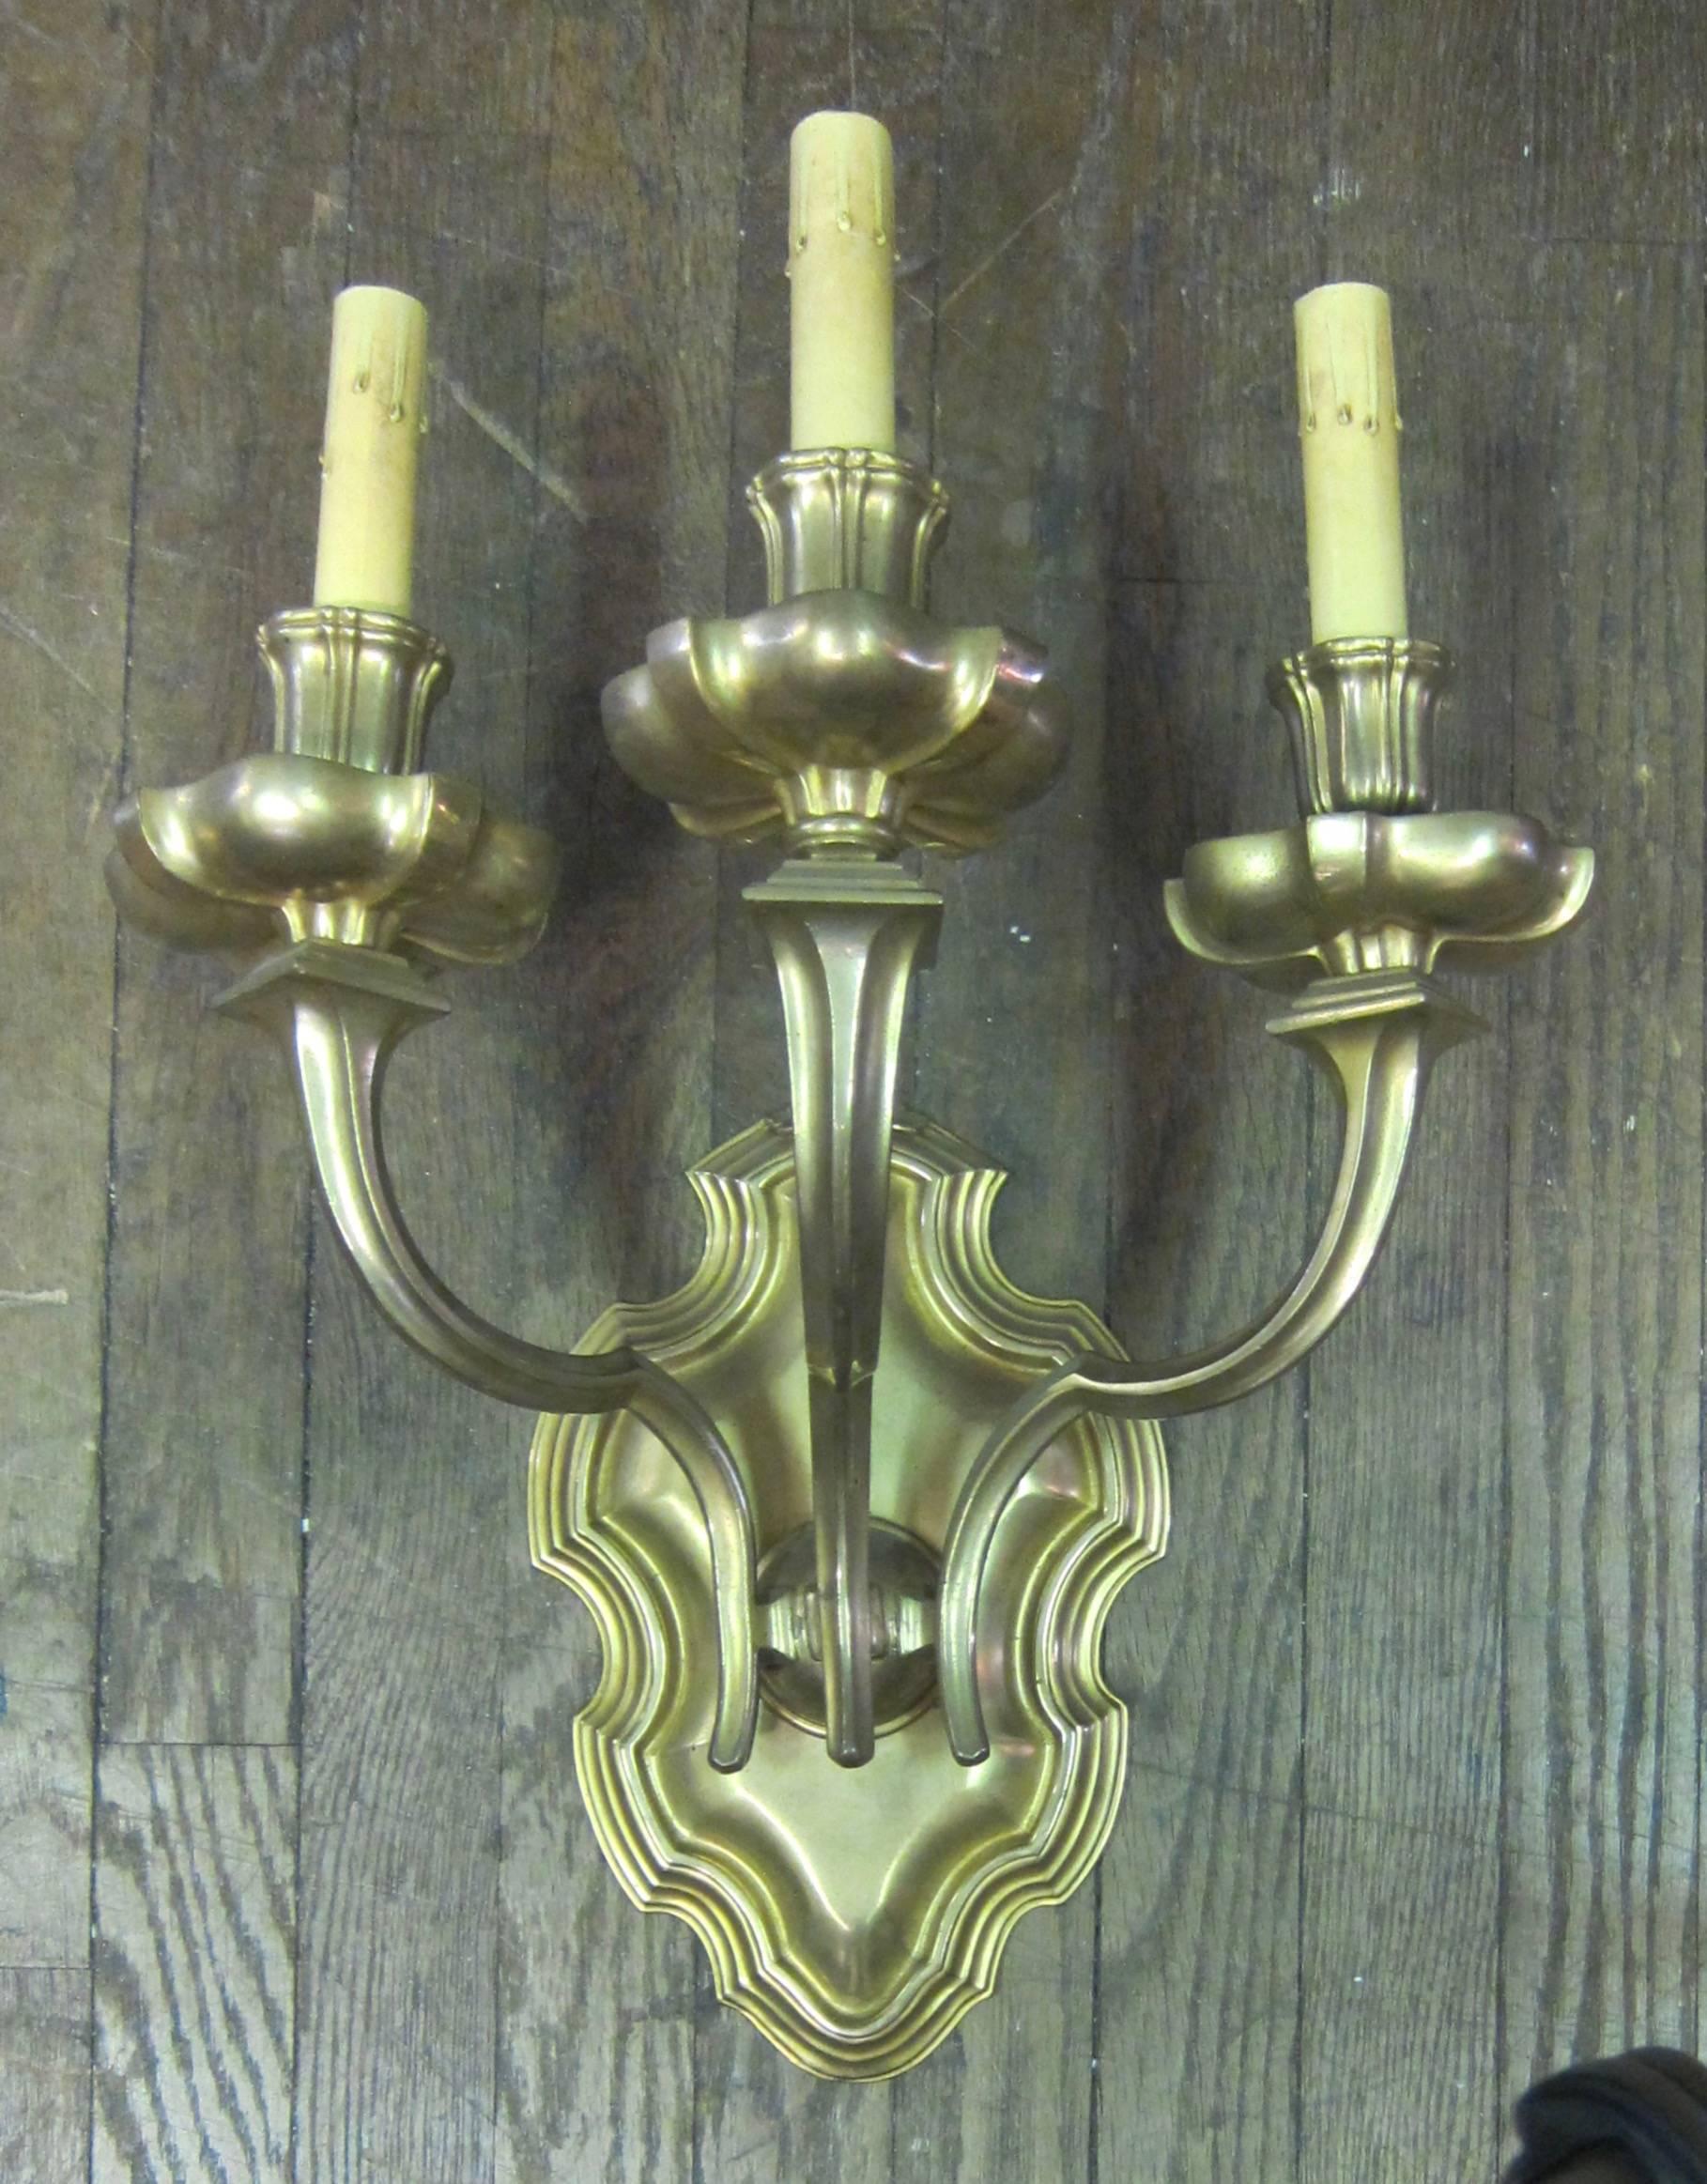 This vintage pair of gold plated bronze wall sconces was designed & produced in the 1920s by E F Caldwell. The sconces have a stylized shield backplate with a rippled rim. Three dramatic arms that flare upward & terminate into candleholders